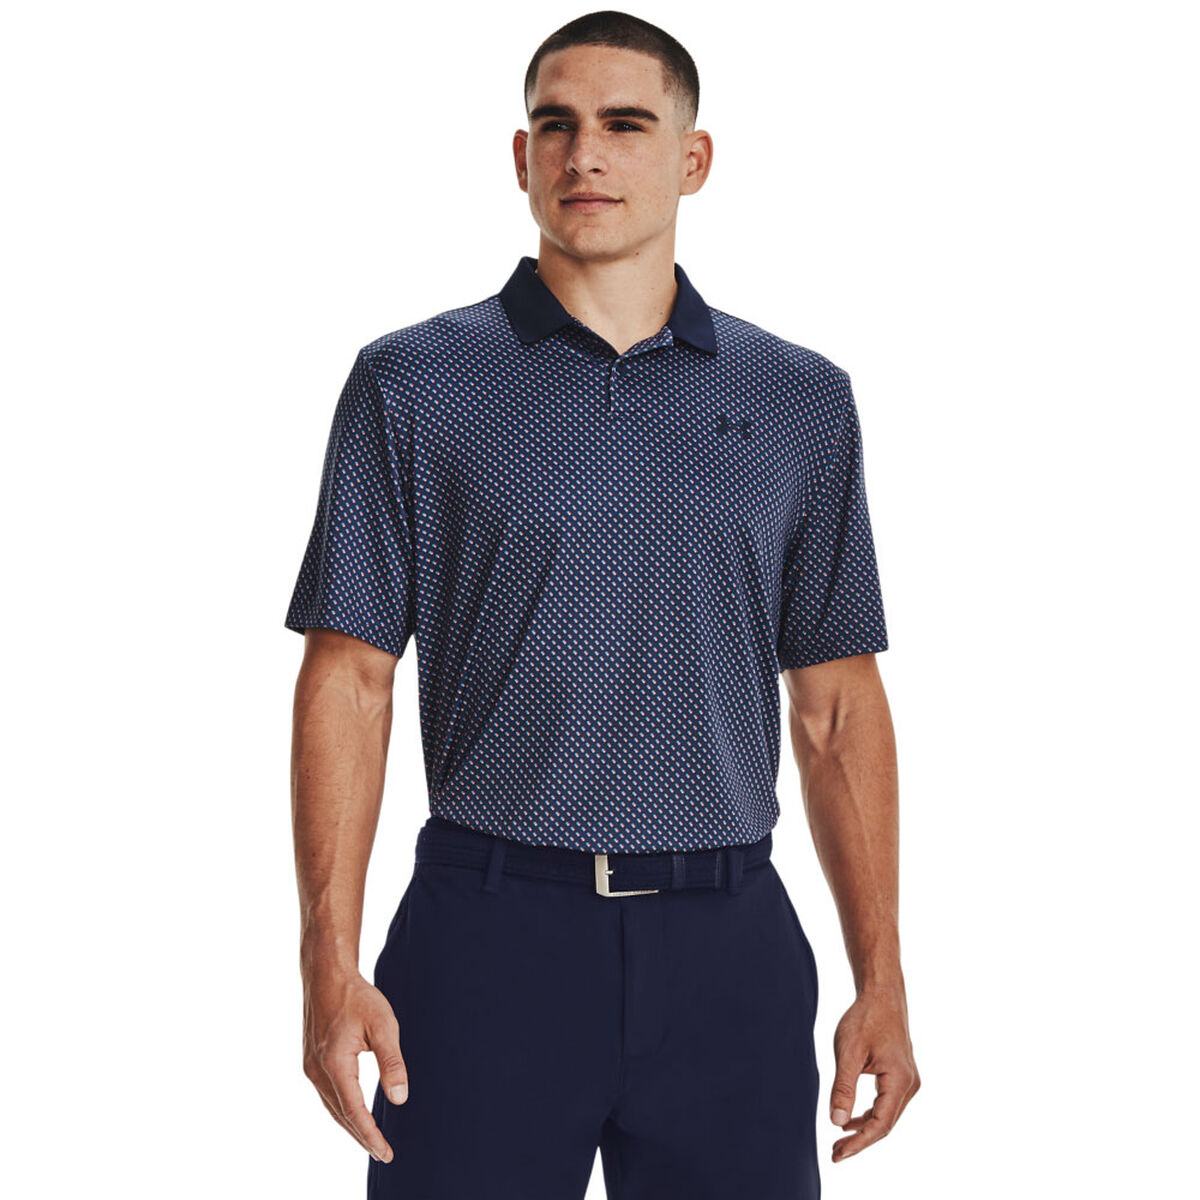 Under Armour Men’s Performance 3.0 Printed Golf Polo Shirt, Mens, Navy/red/navy, Large | American Golf